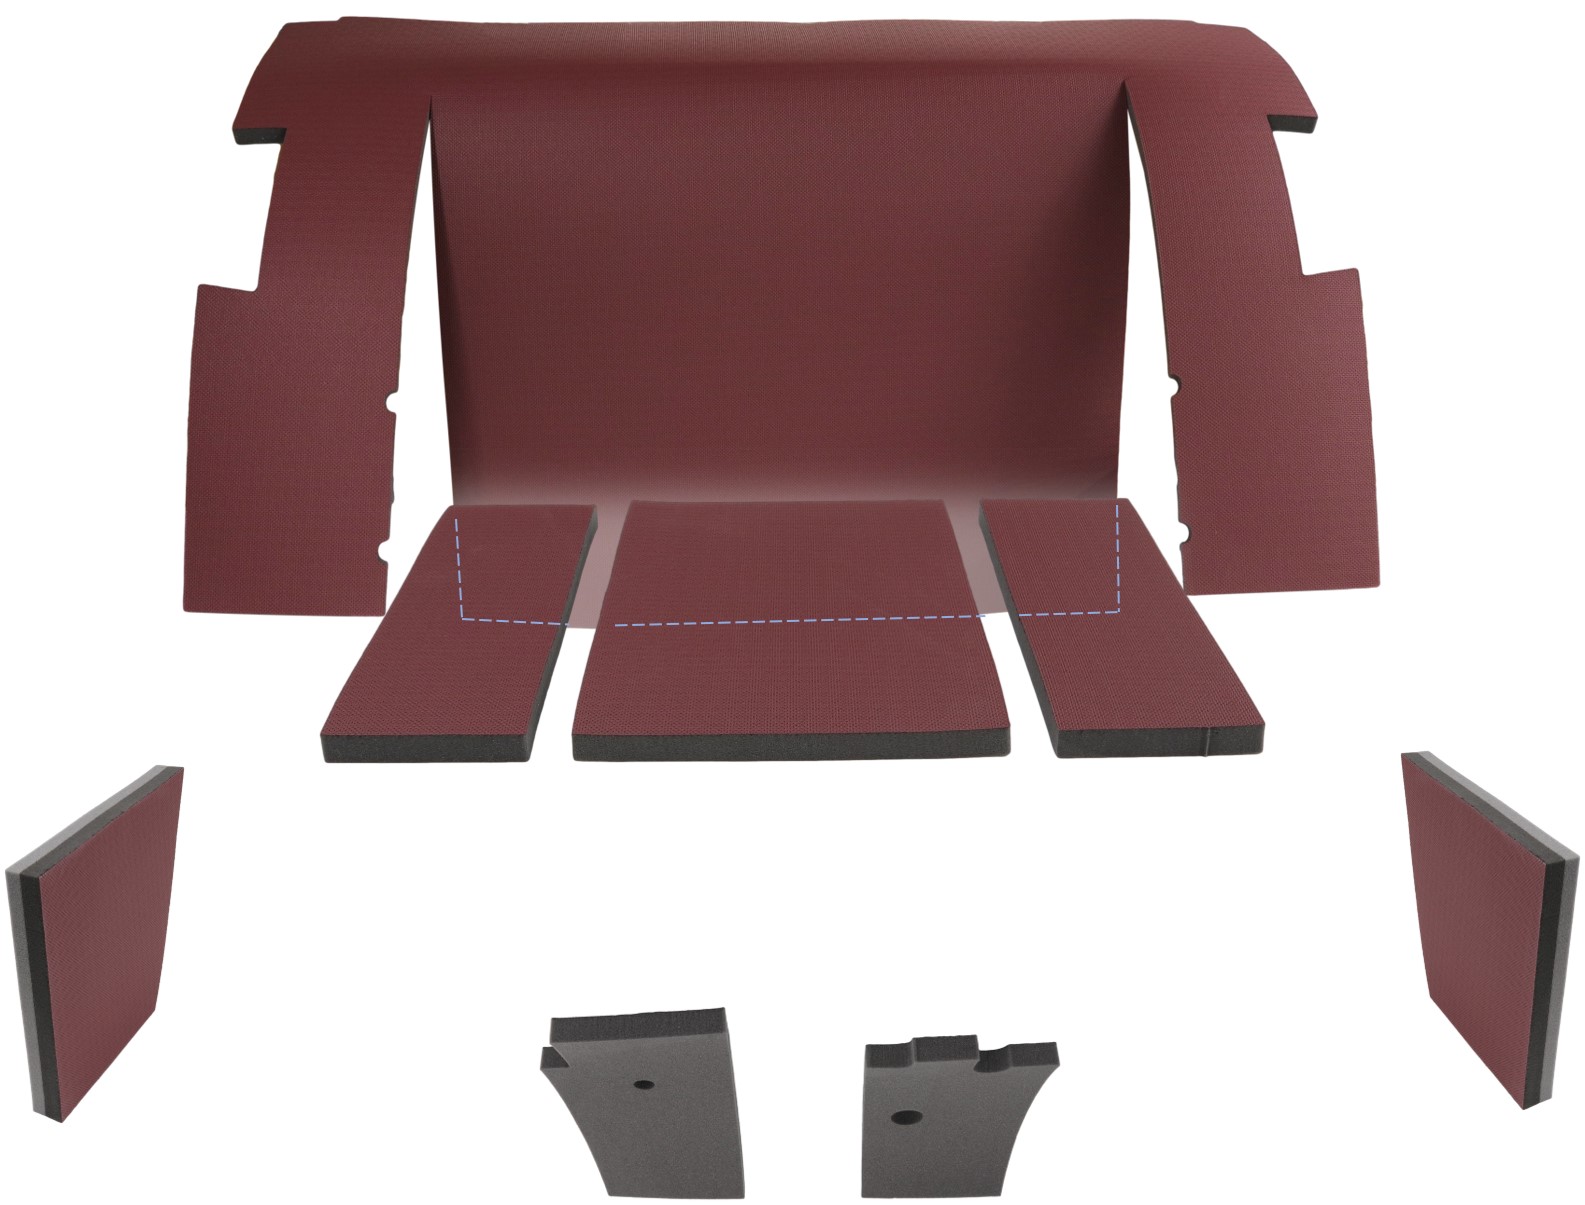 IH 86/3388 LOWER KIT (BURGUNDY) Questions & Answers